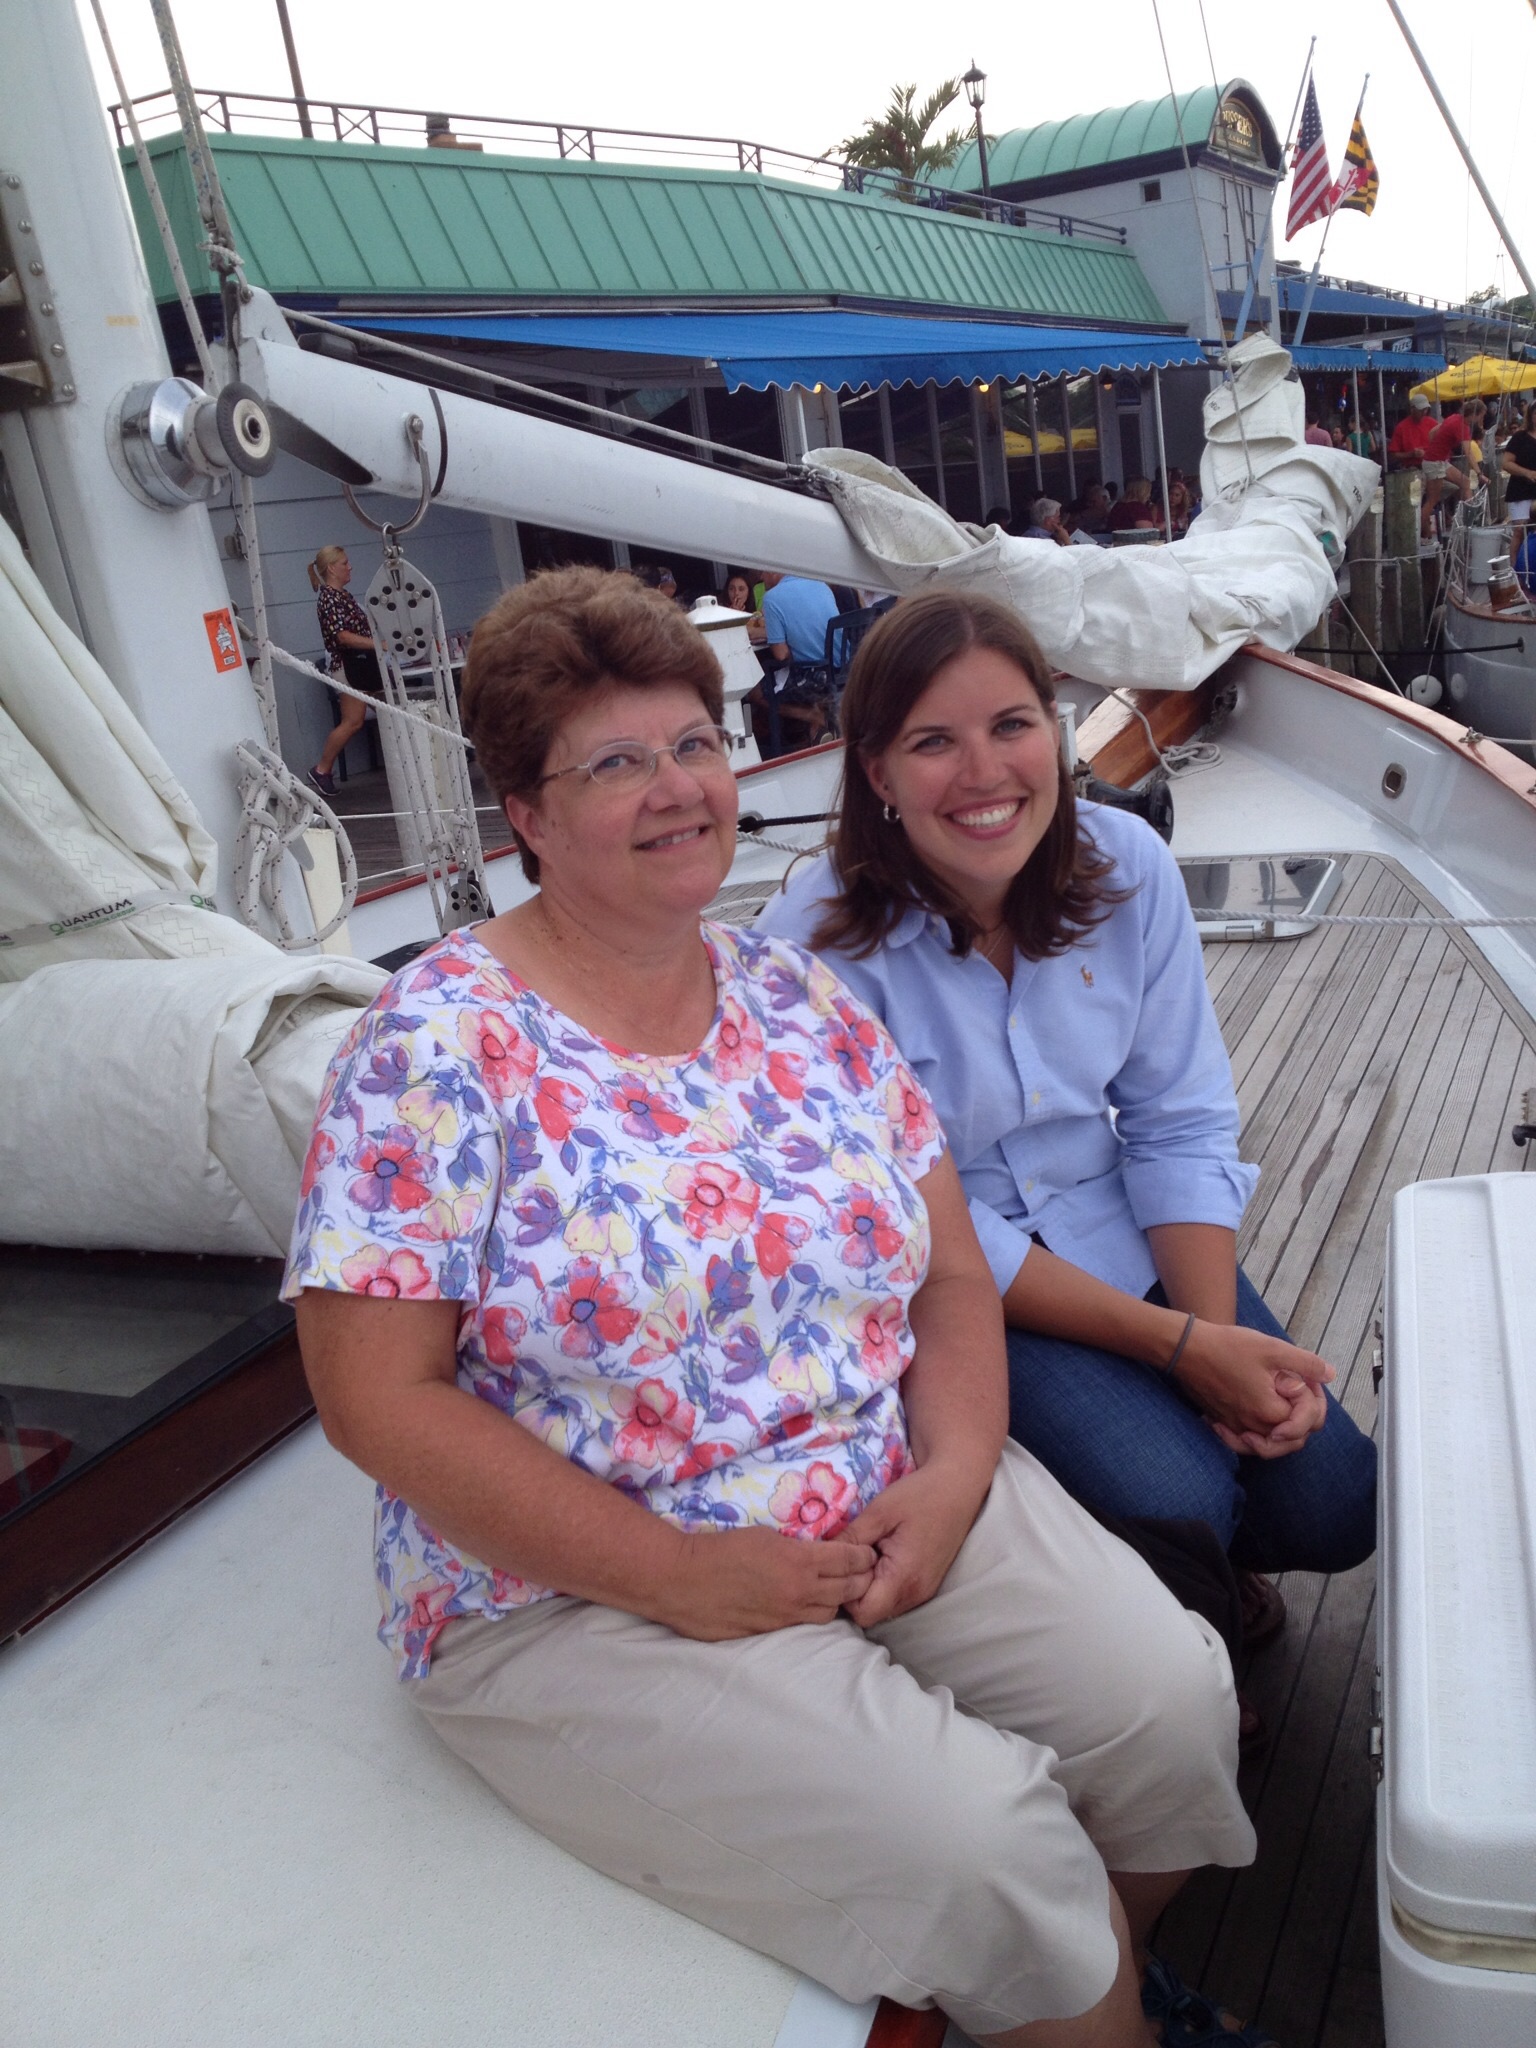 Two ladies smiling just getting ready for their sail on the schooner